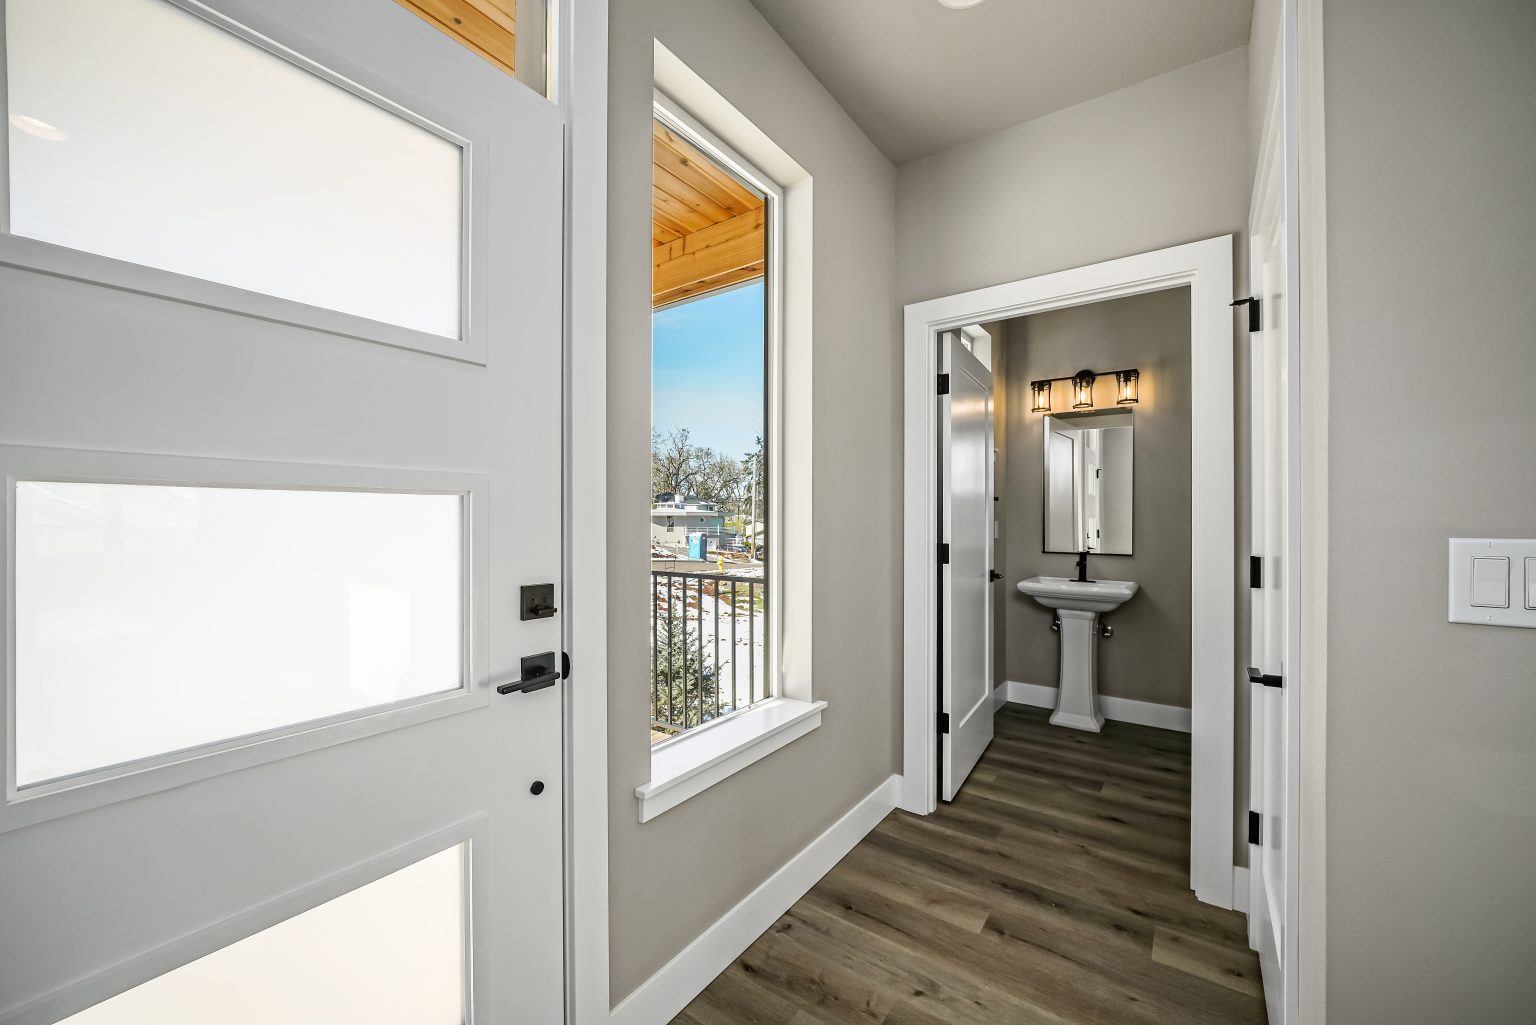 interior front door entry with large window, white trim, gray walls, hardwood flooring and opening to a half bathroom in the hallway